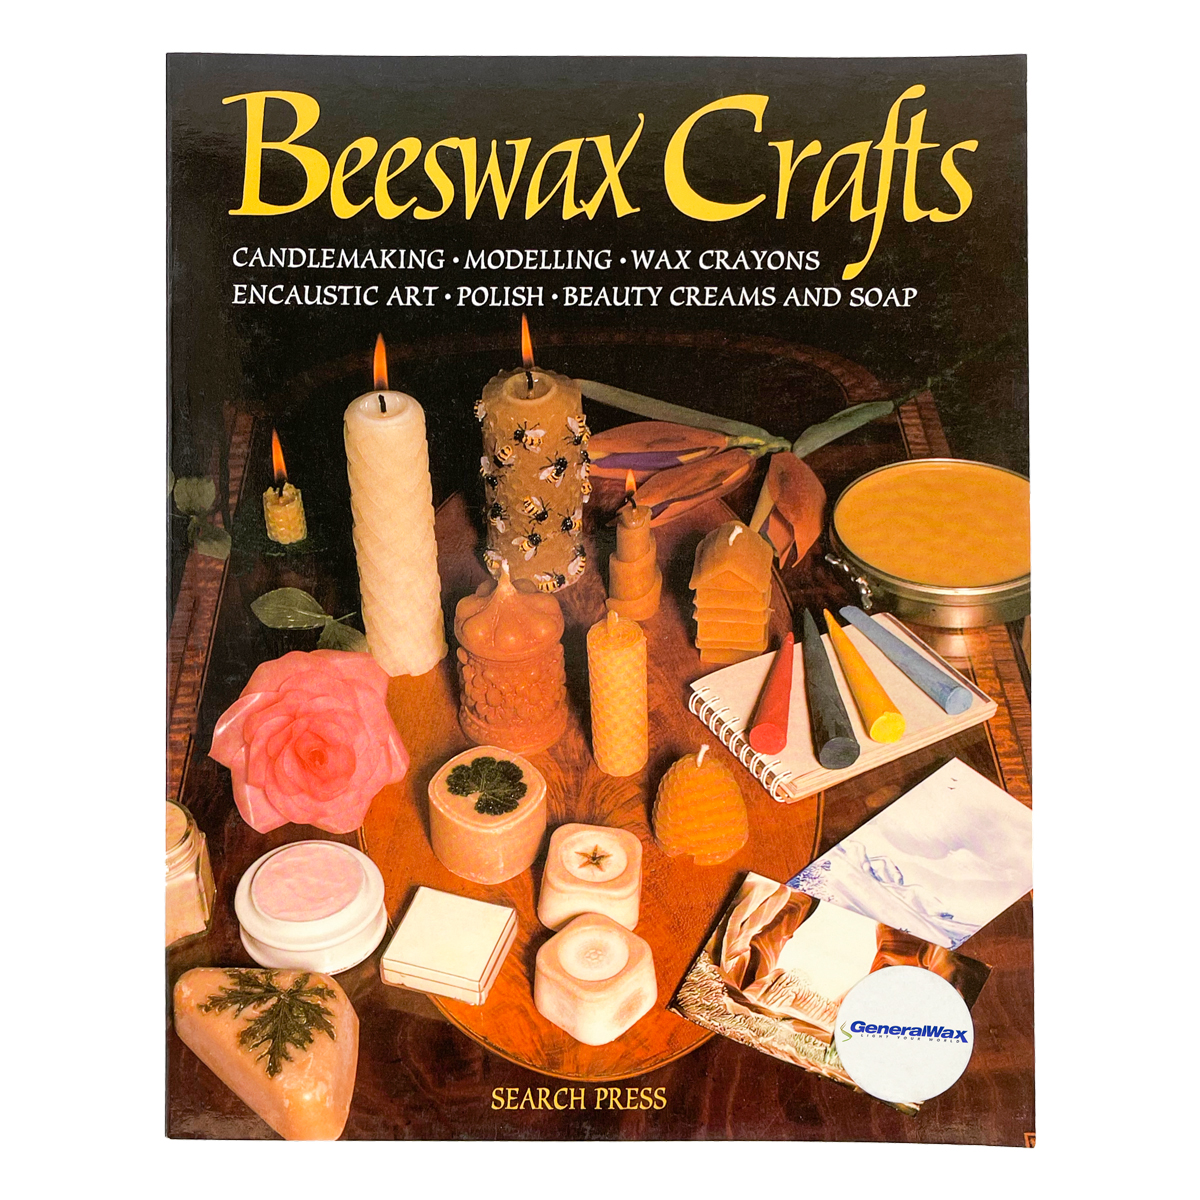 BEESWAX CRAFTS (Candle Making Book)